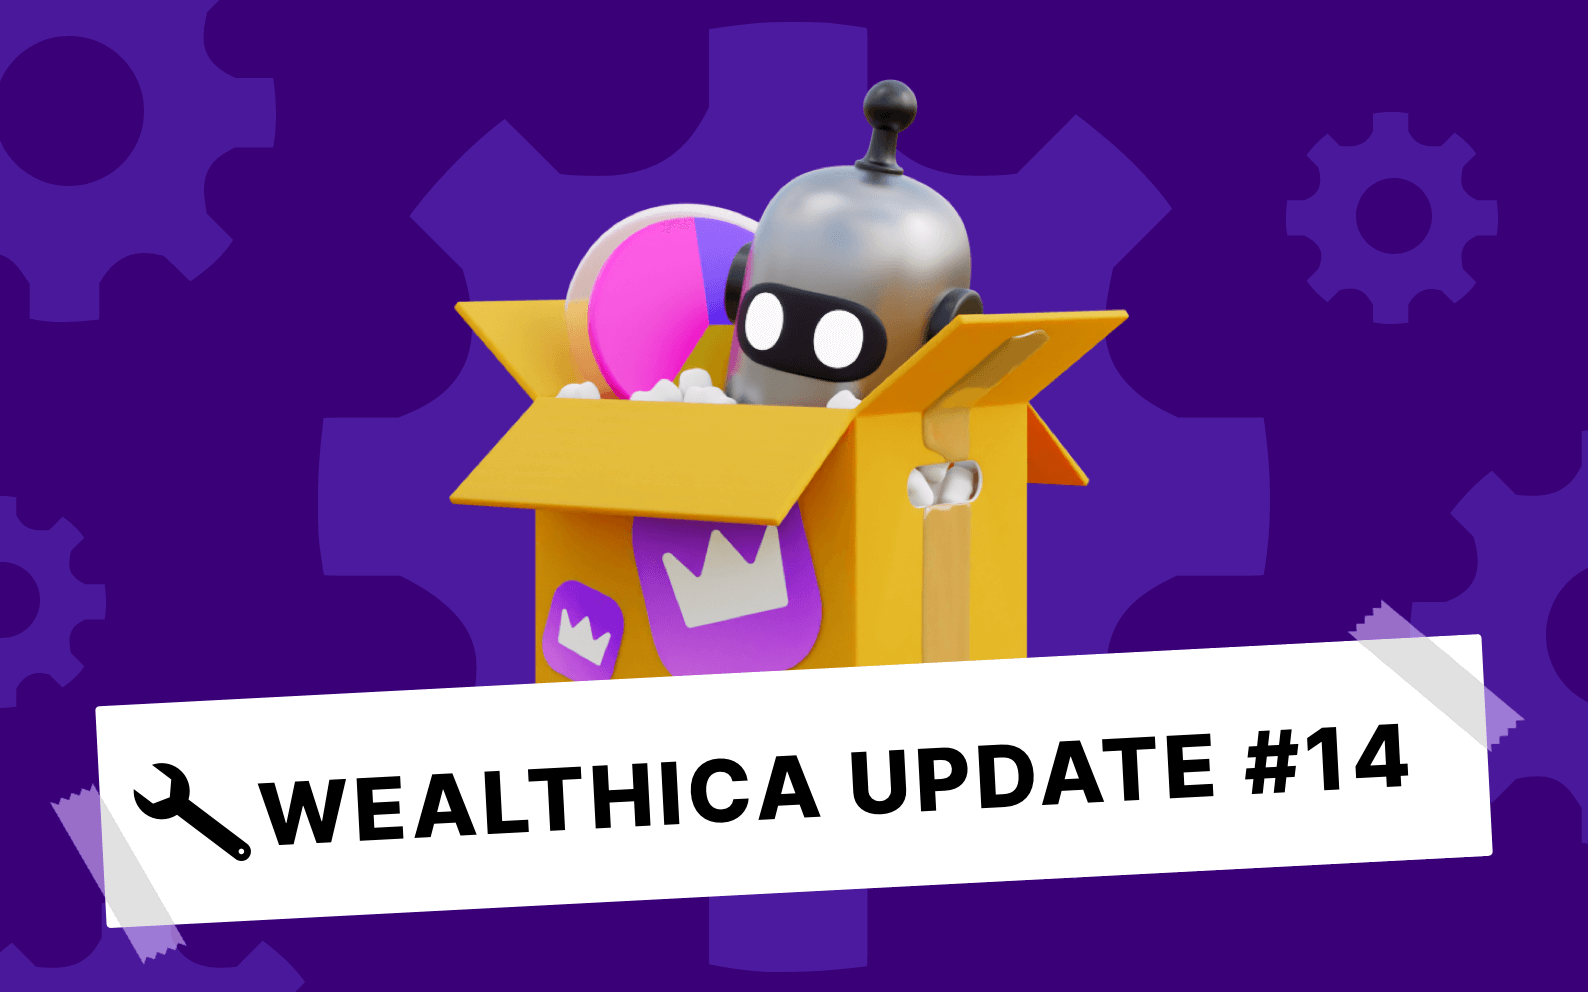 Wealthica Product Update #14